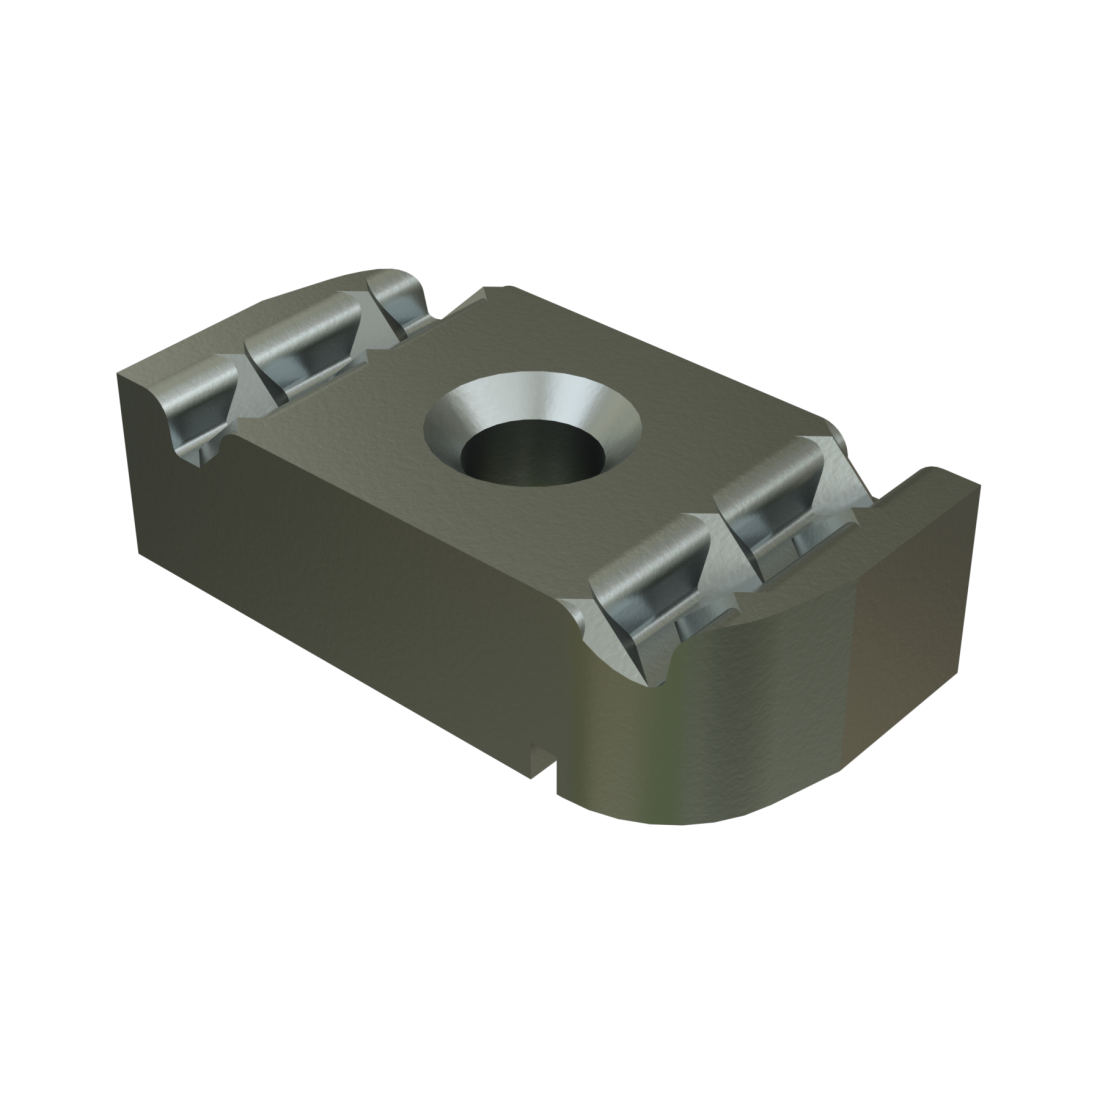 A3006 - CHANNEL NUT W/O SPRING (1-1/4" SERIES) - 1/4" PIPE SIZE